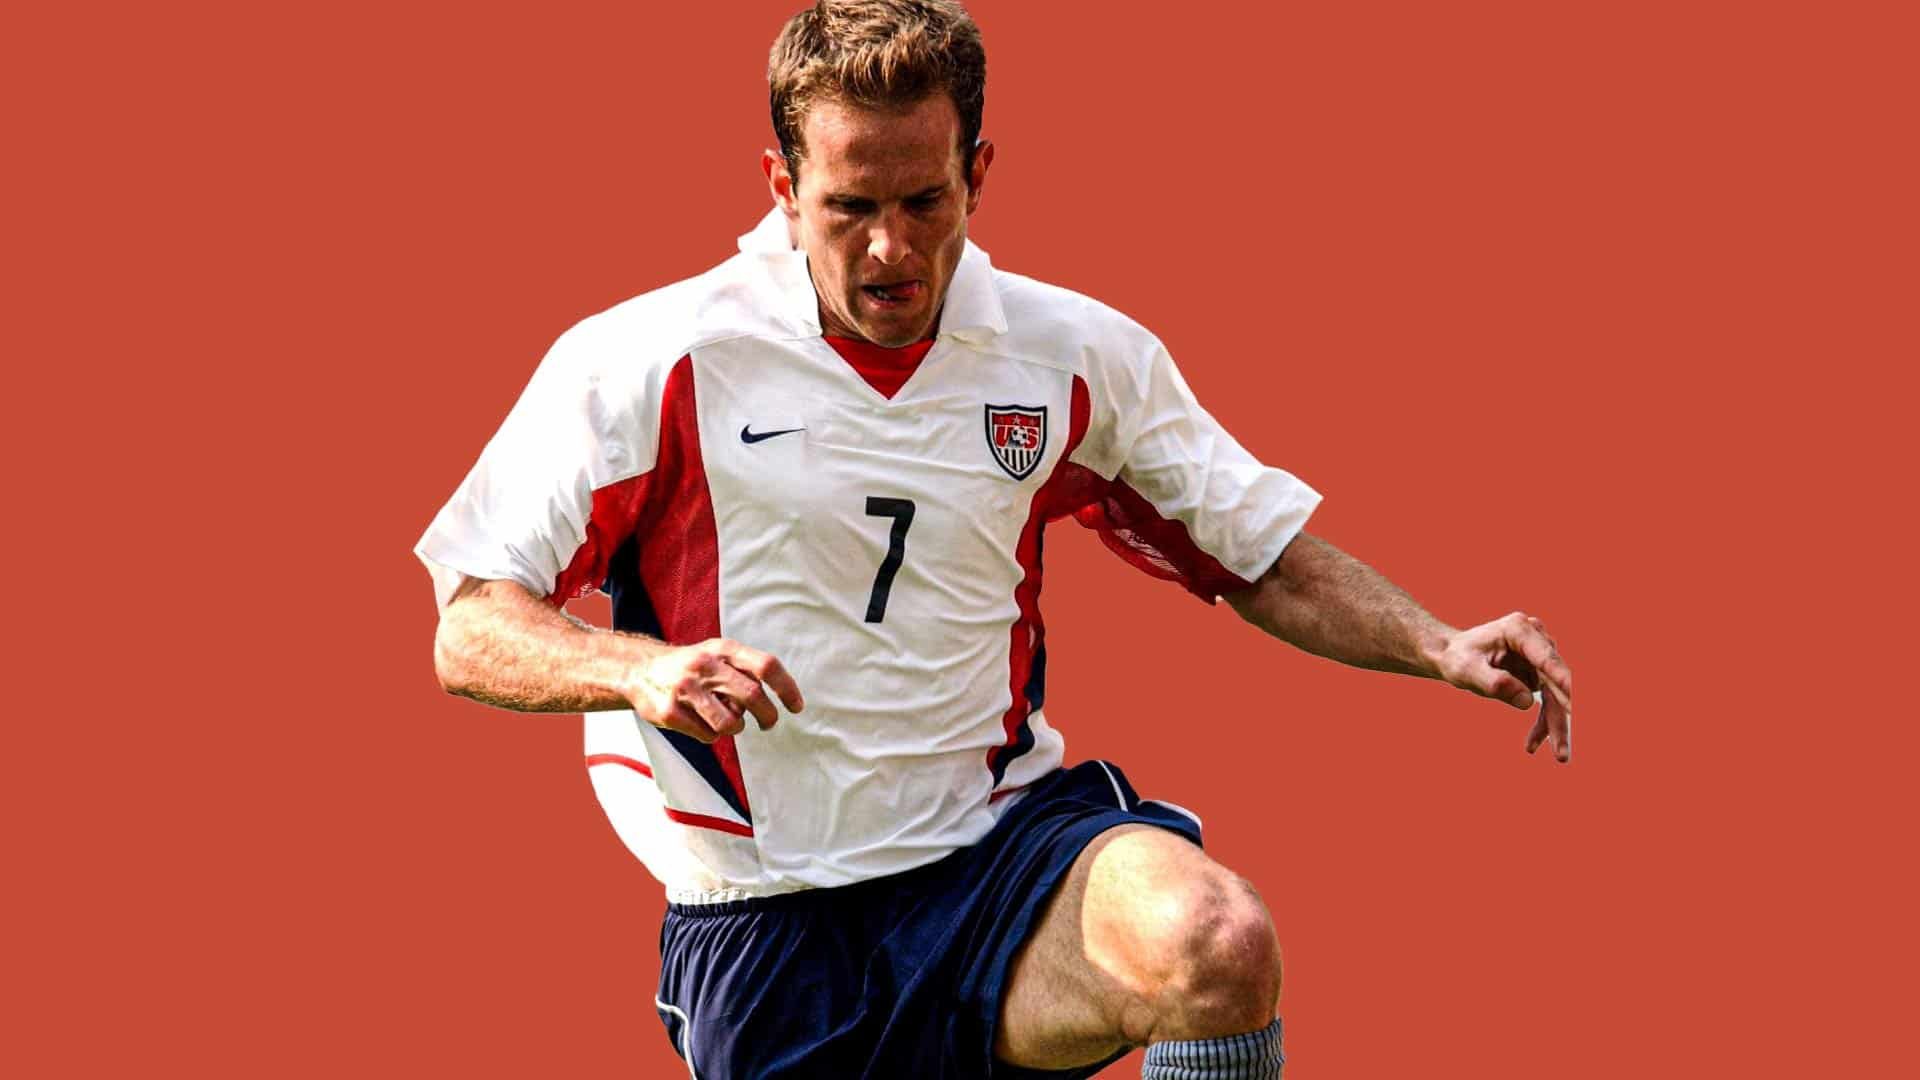 Eddie Lewis playing for the USMNT at the 2002 World Cup, against a red backdrop